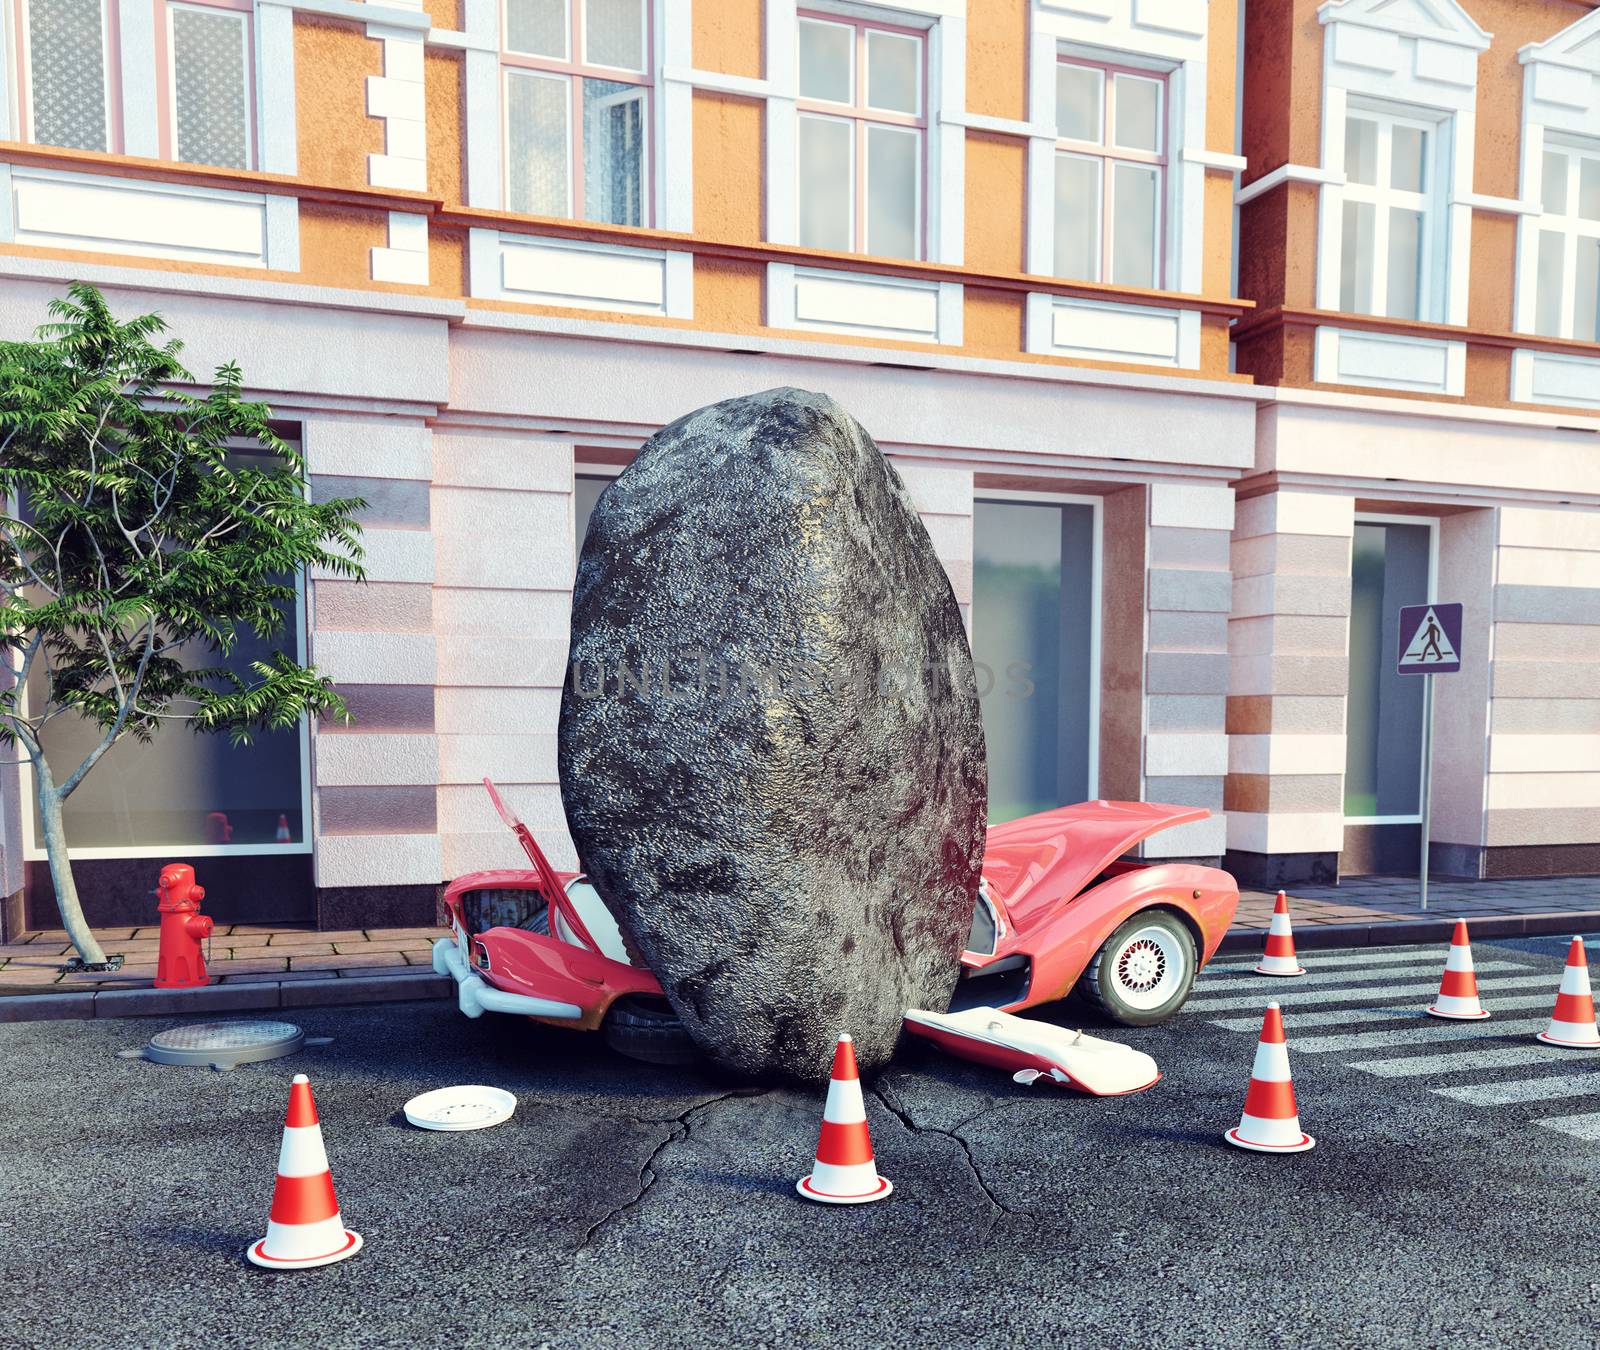 meteorite fell on a parked car. 3d concept